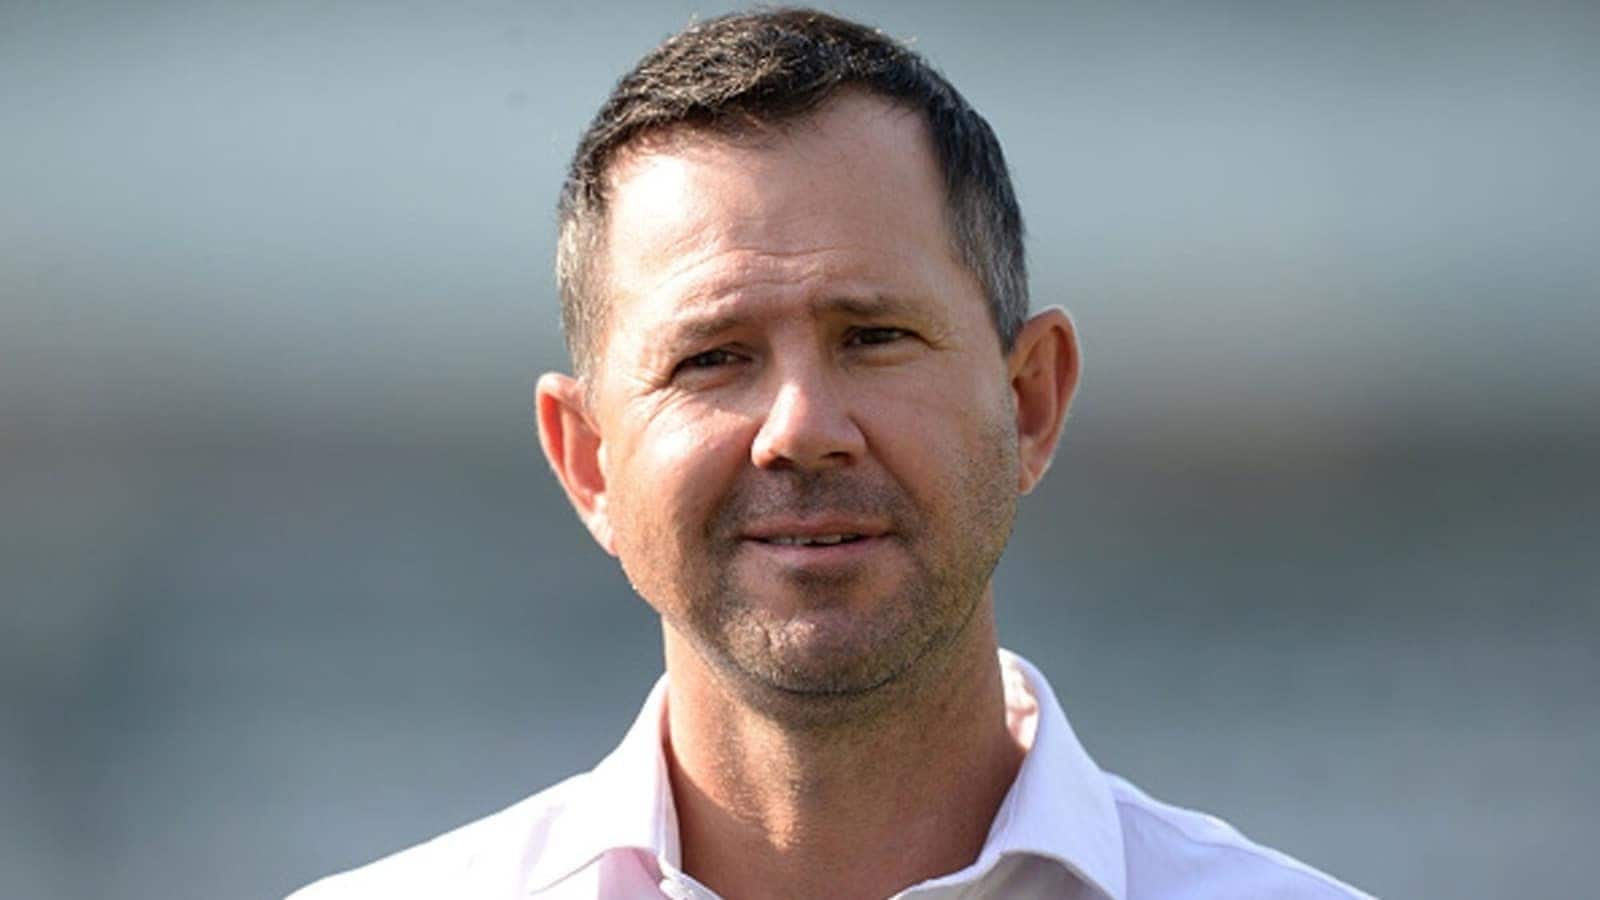 Ponting shares his thoughts on the DK-Pant selection debate